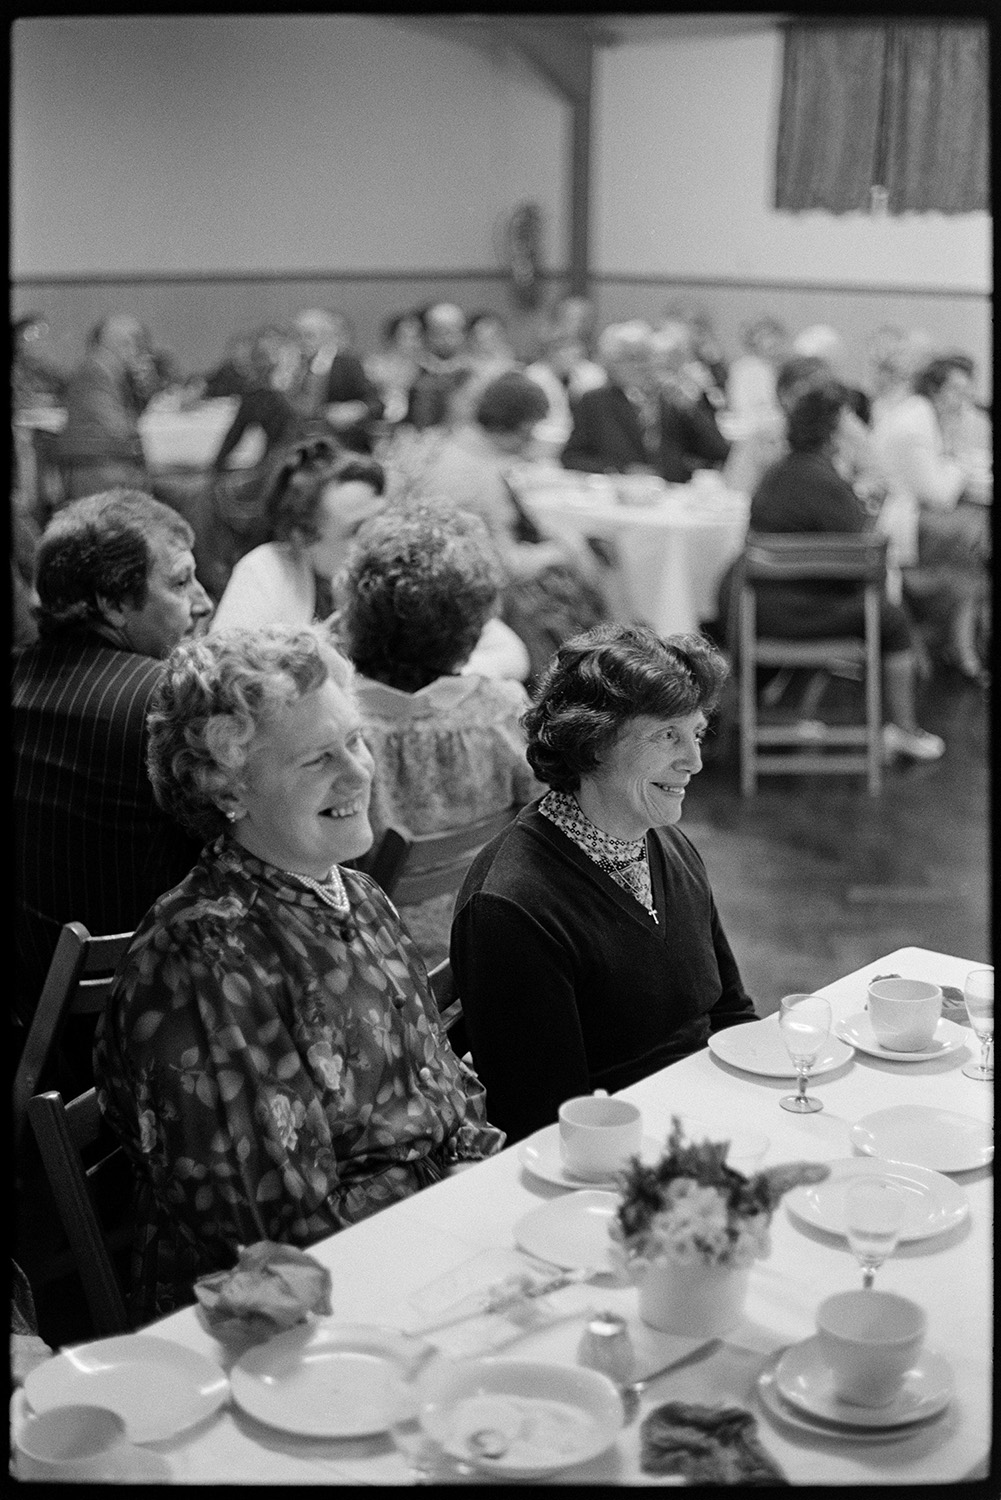 W I Centenary dinner, woman cutting cake, entertainment play on stage. 
[Women sat at tables at the Women's Institute Centenary Dinner in Dolton Village Hall.]